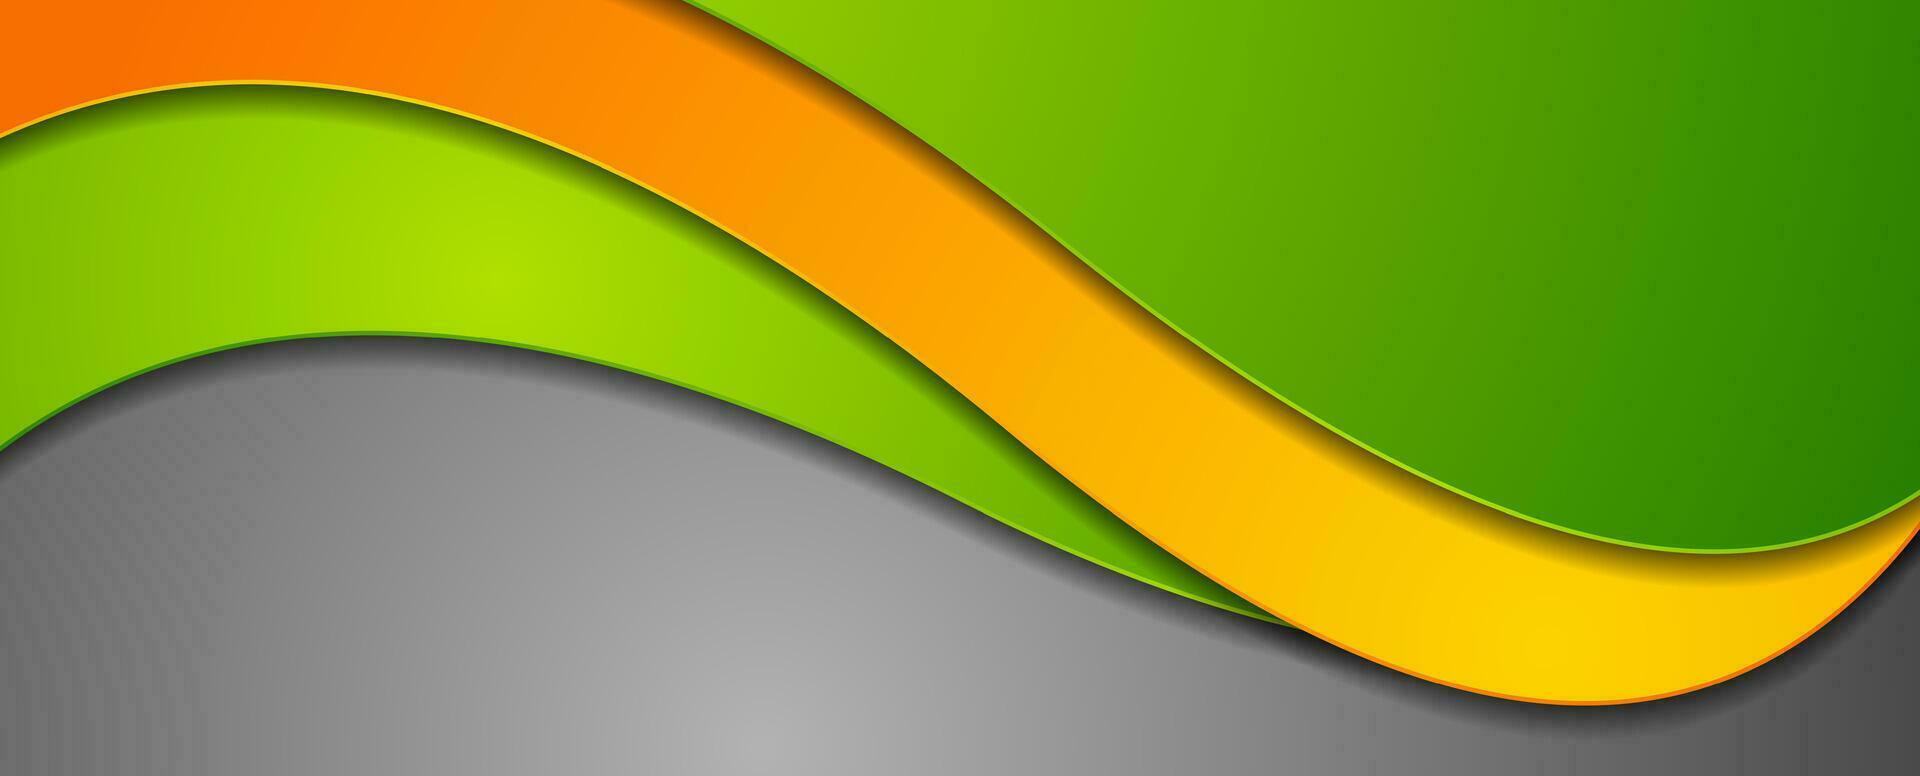 Green and orange abstract waves corporate background vector